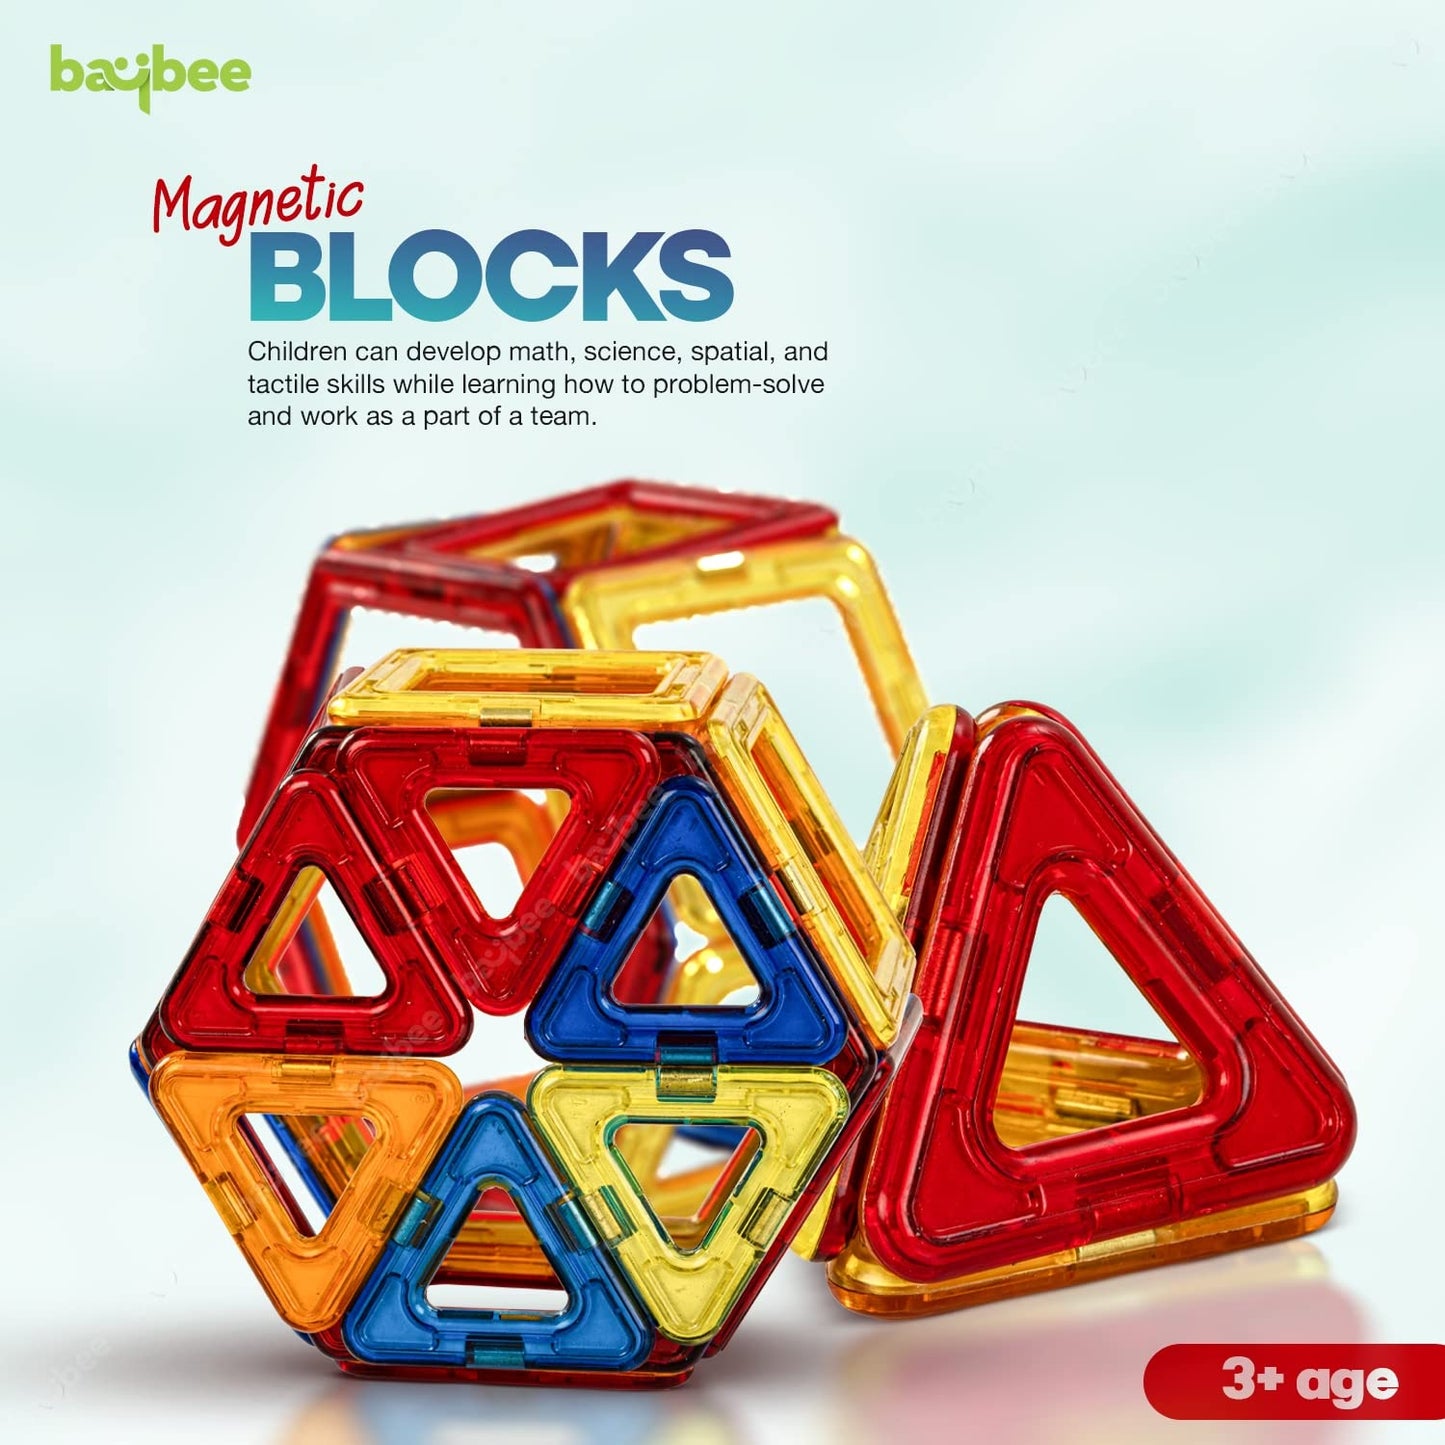 Baybee Magnetic Tiles Building Blocks Toy for Kids